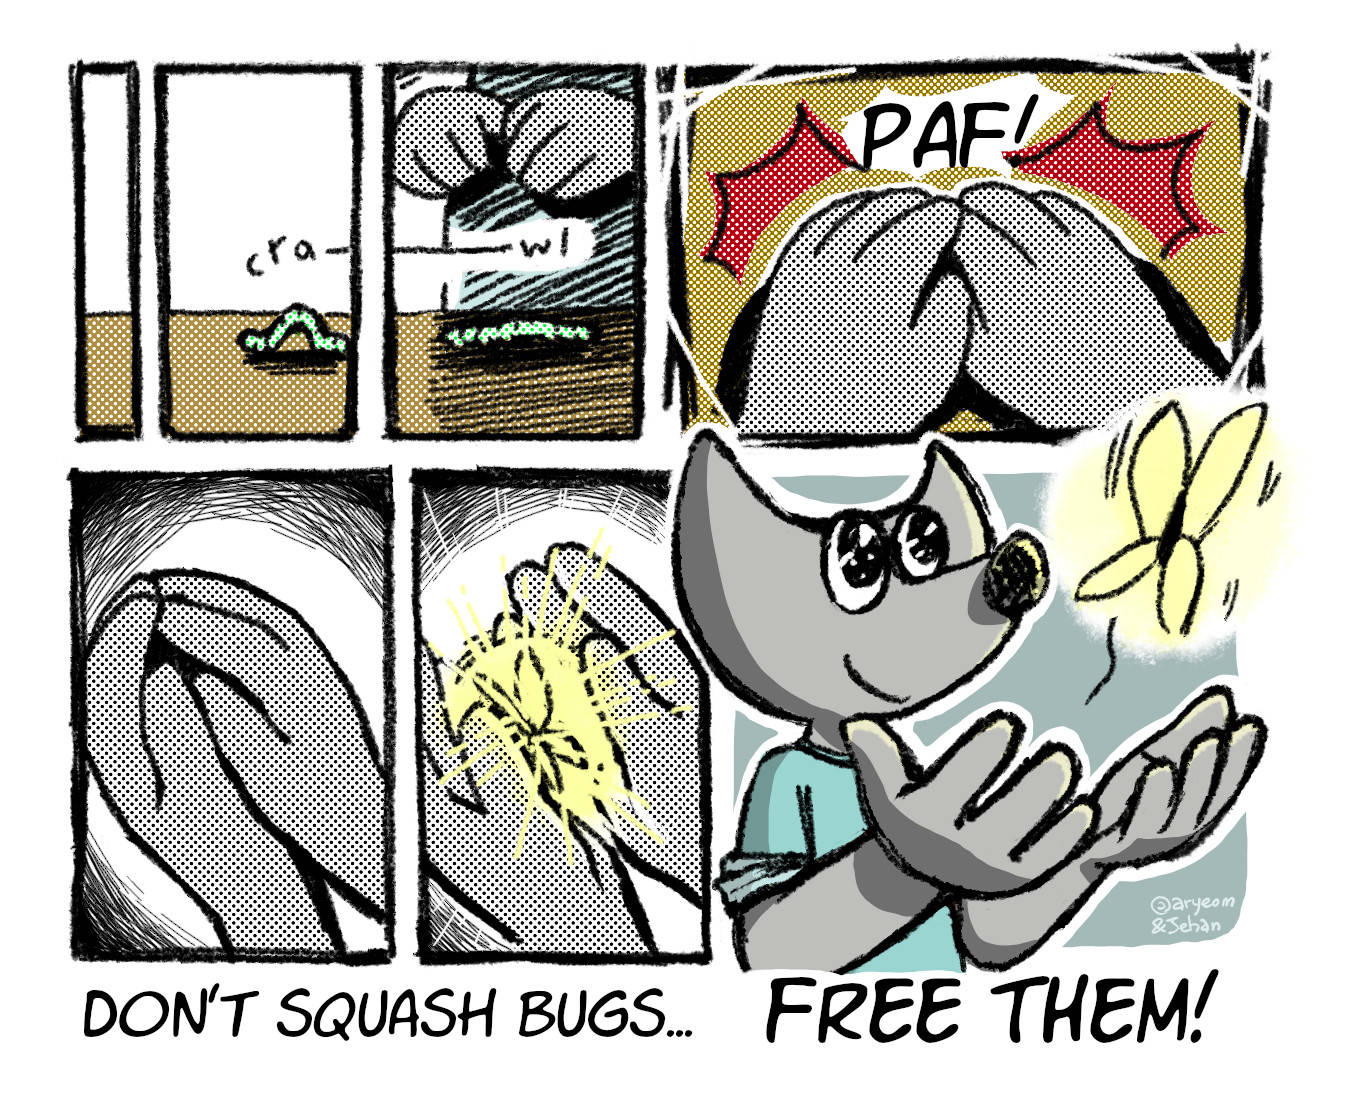 Don't squash bugs, free them, by Aryeom